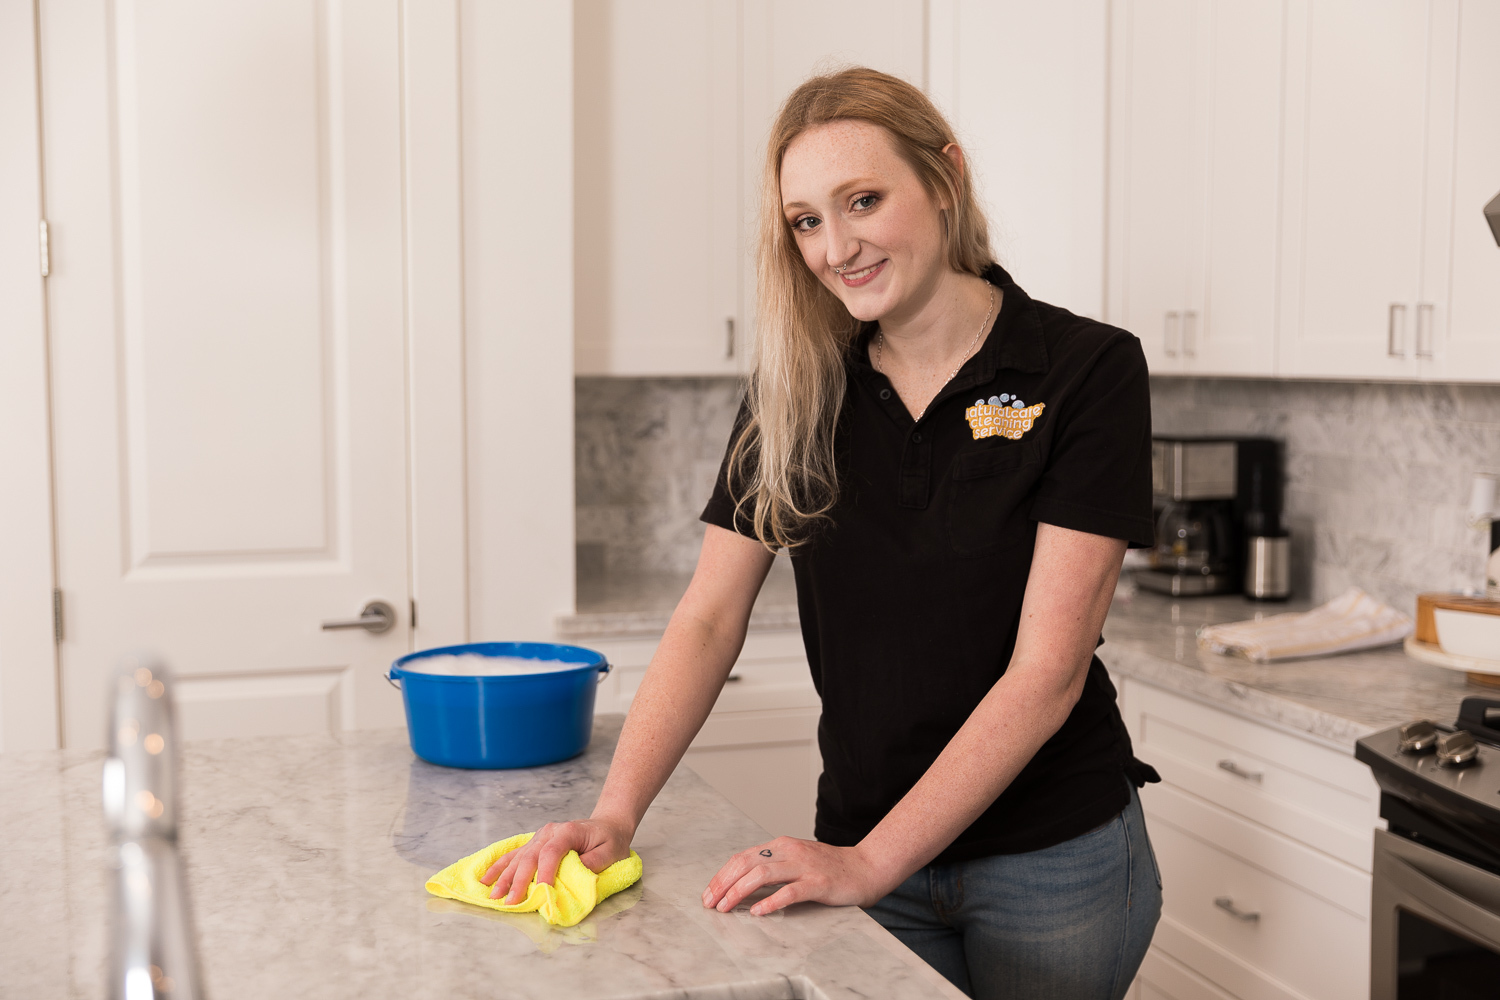 Naturalcare Cleaning Service maid is scrubbing kitchen countertops.